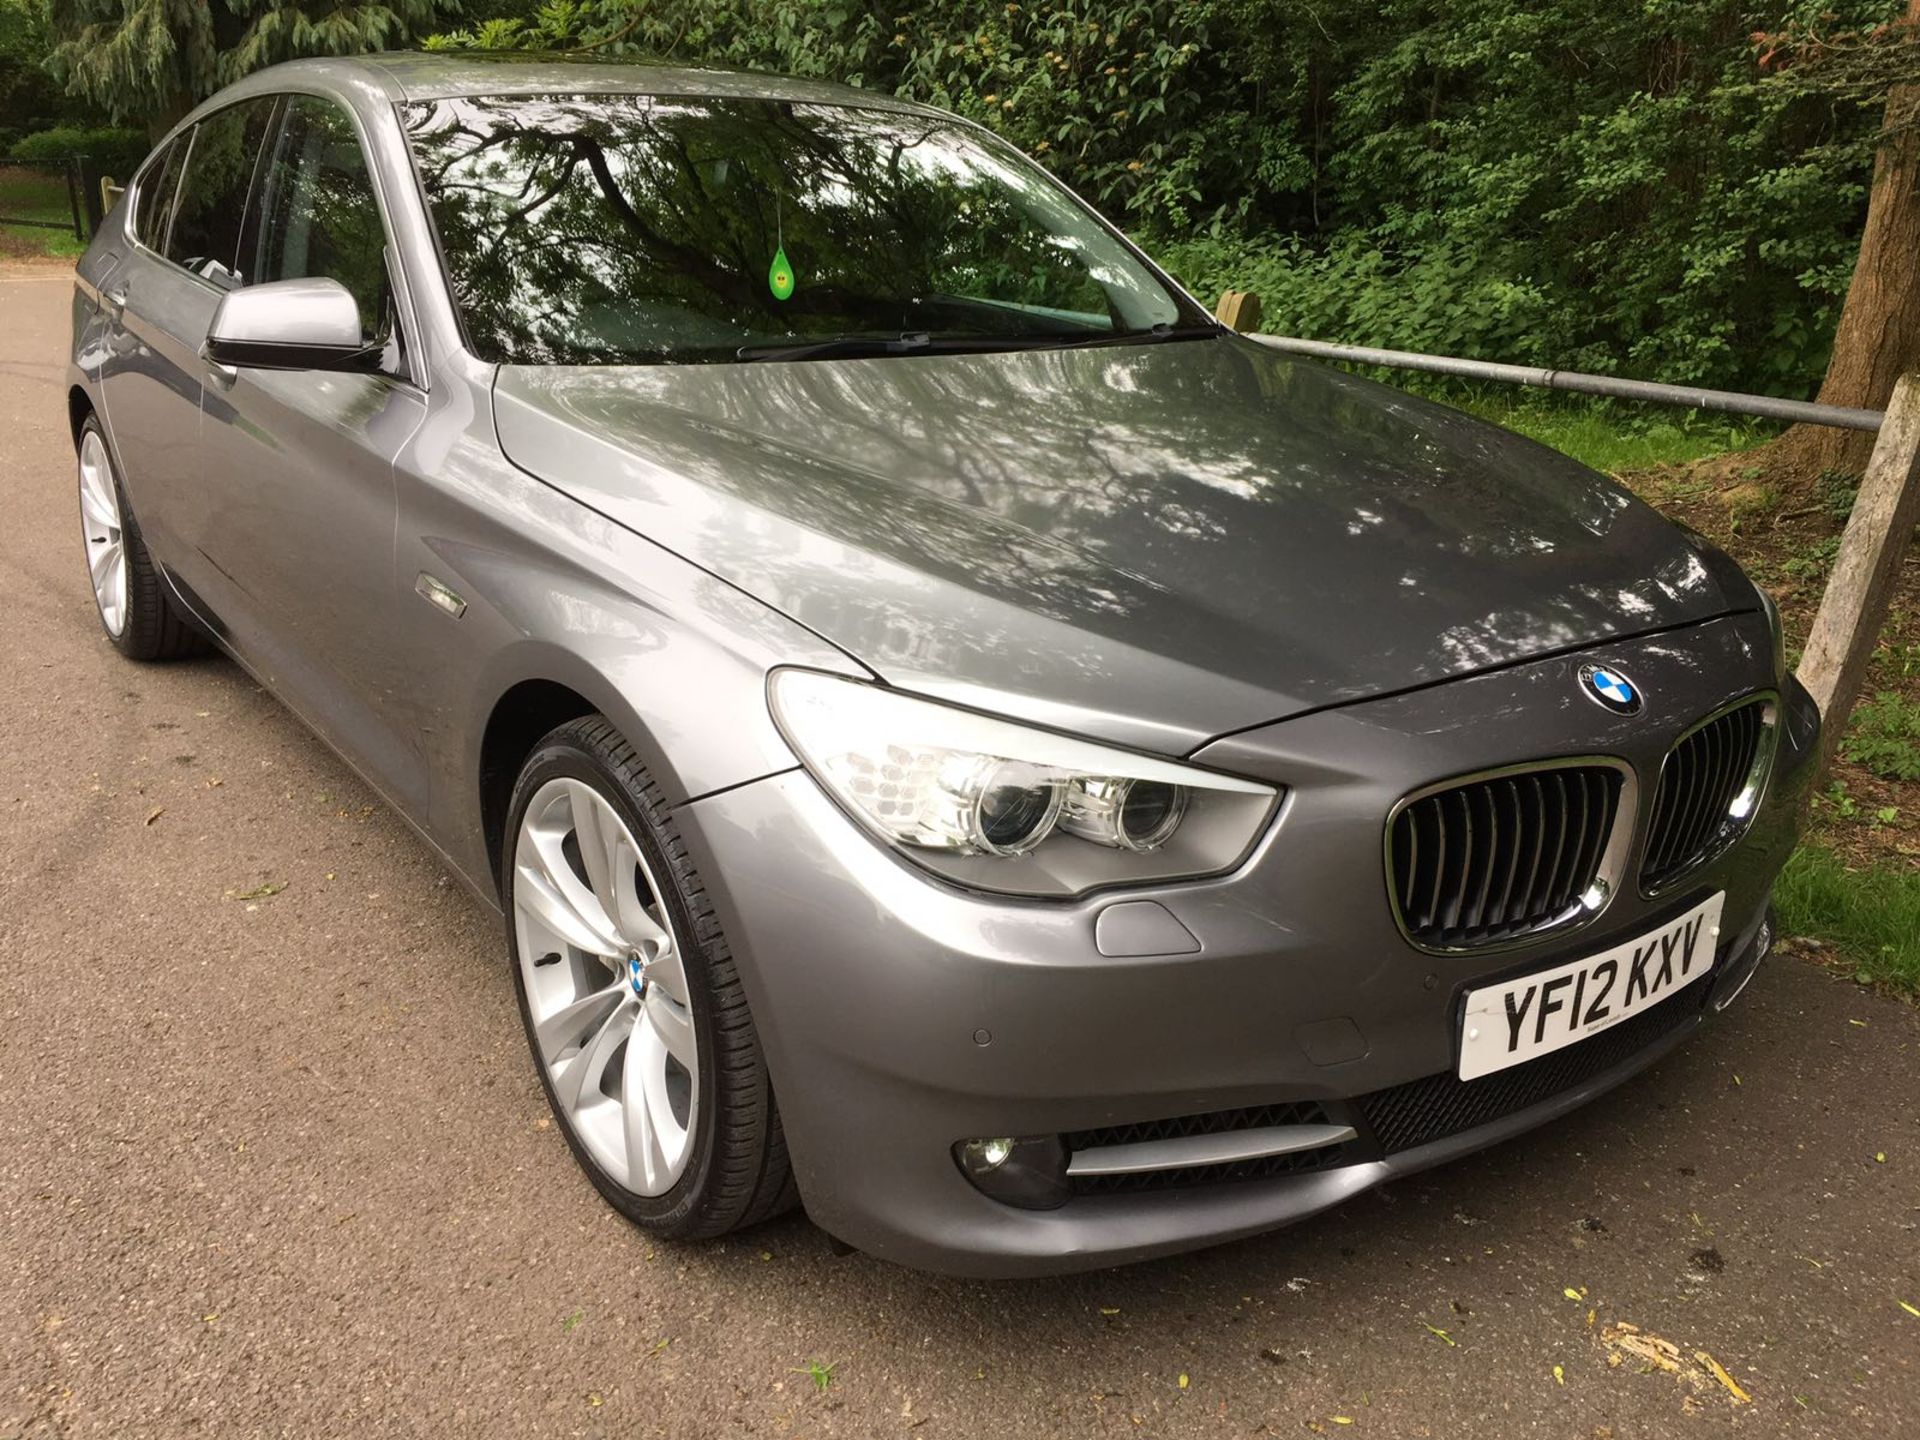 BMW 535D GT Gran Turismo 2012/12. 57,000 Miles. Automatic Gearbox - Image 9 of 19